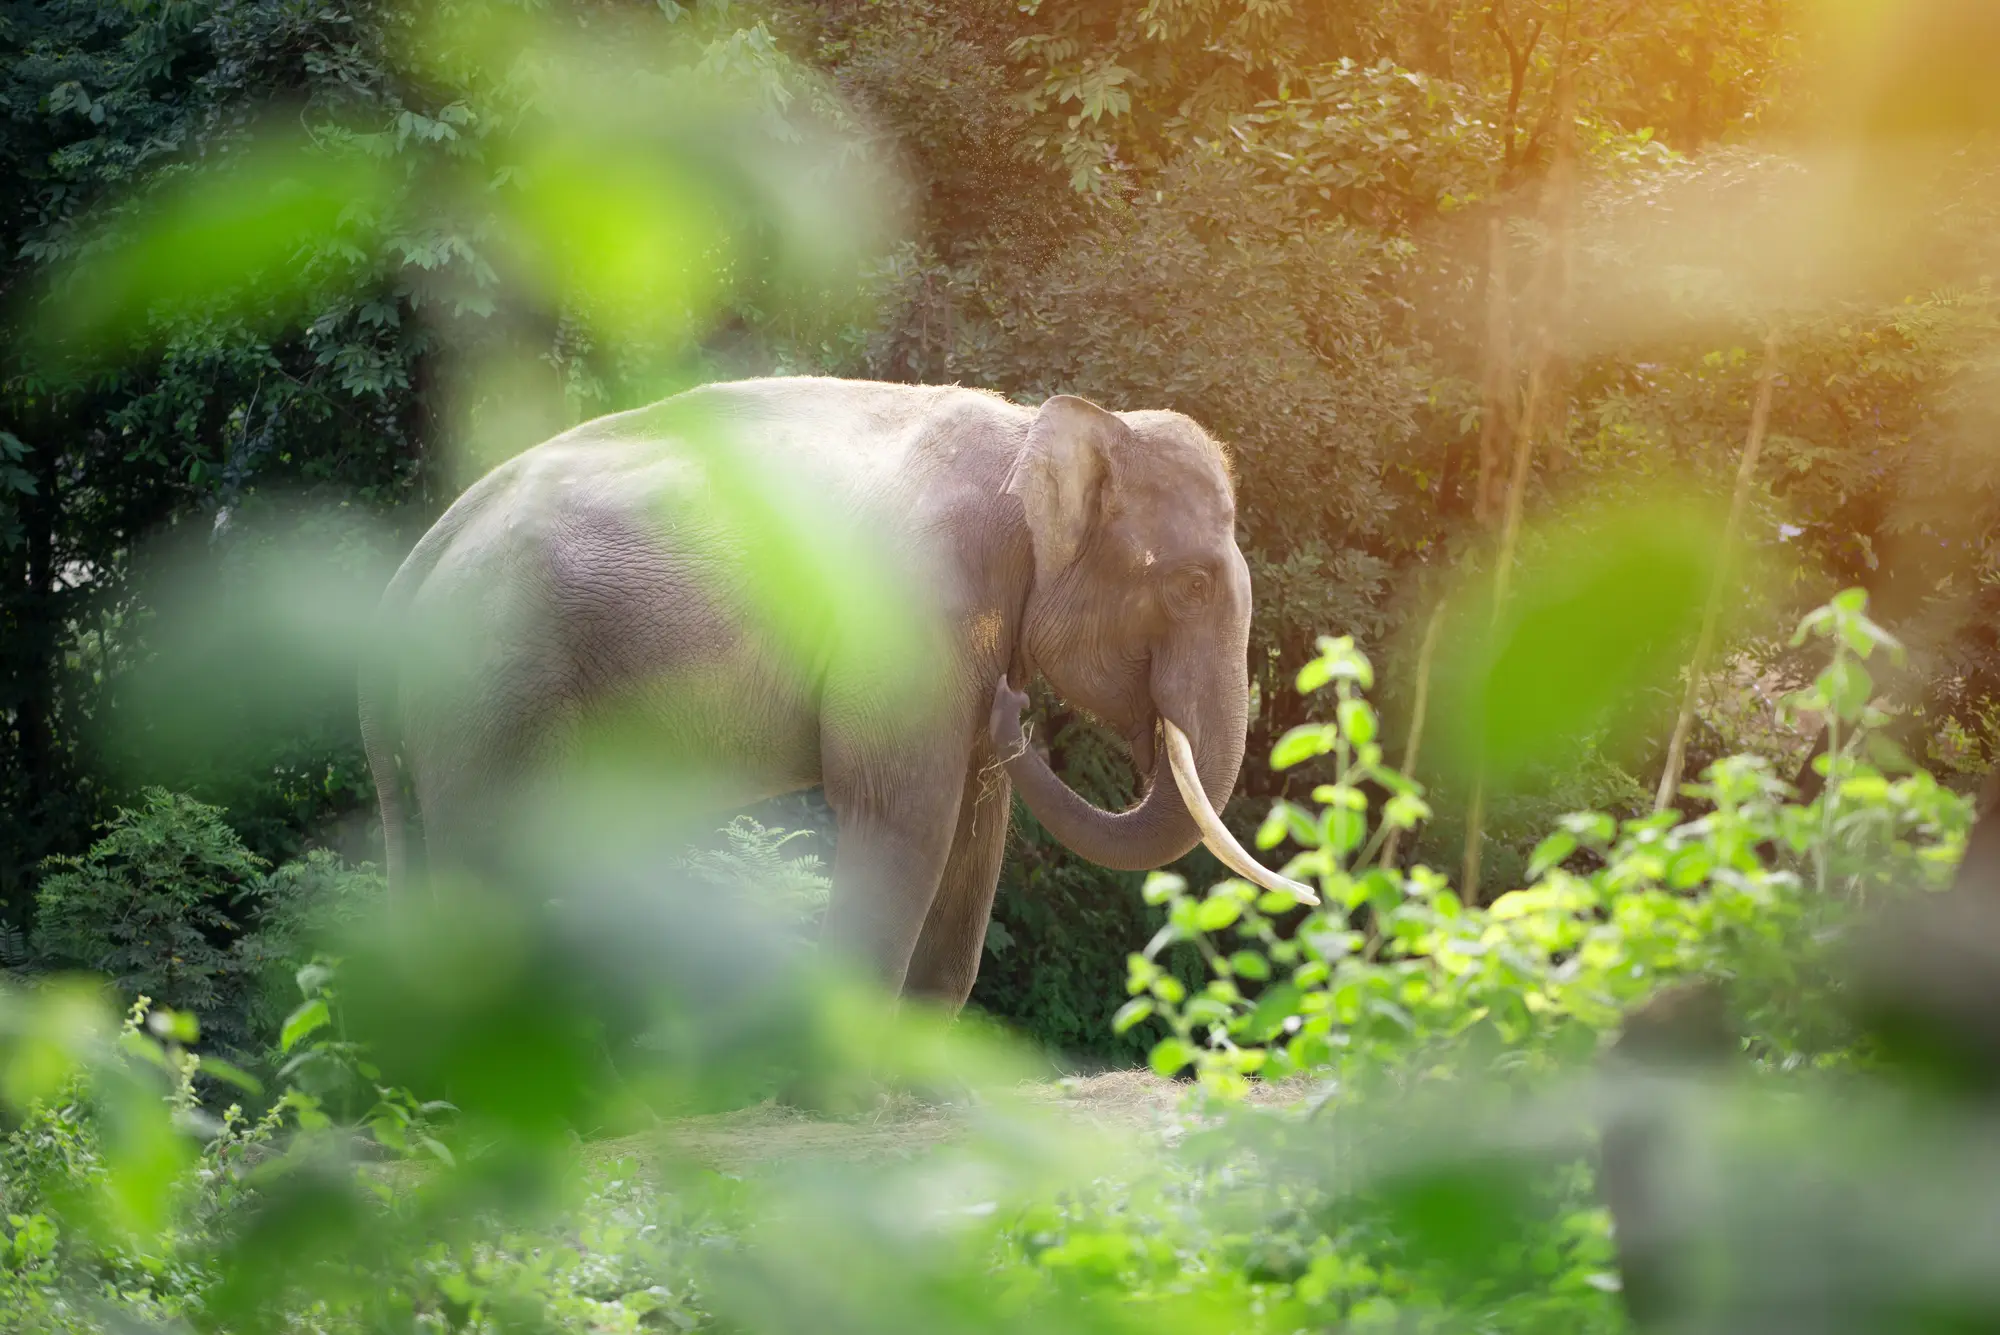 Wild elephant seen through the jungle greenery in Thailand vs. Indonesia.